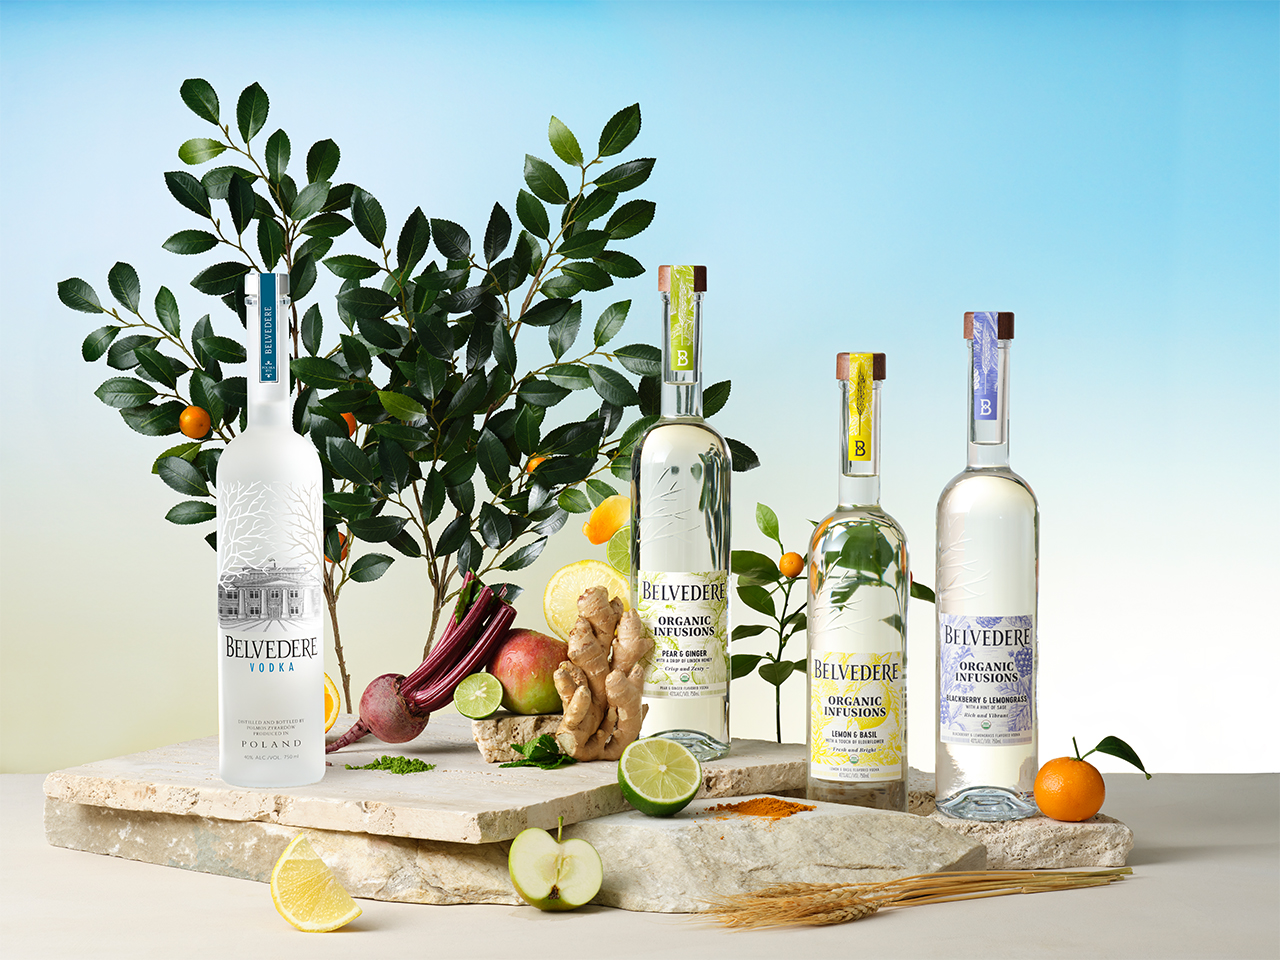 Order Belvedere Organic Infusions Vodka Collection